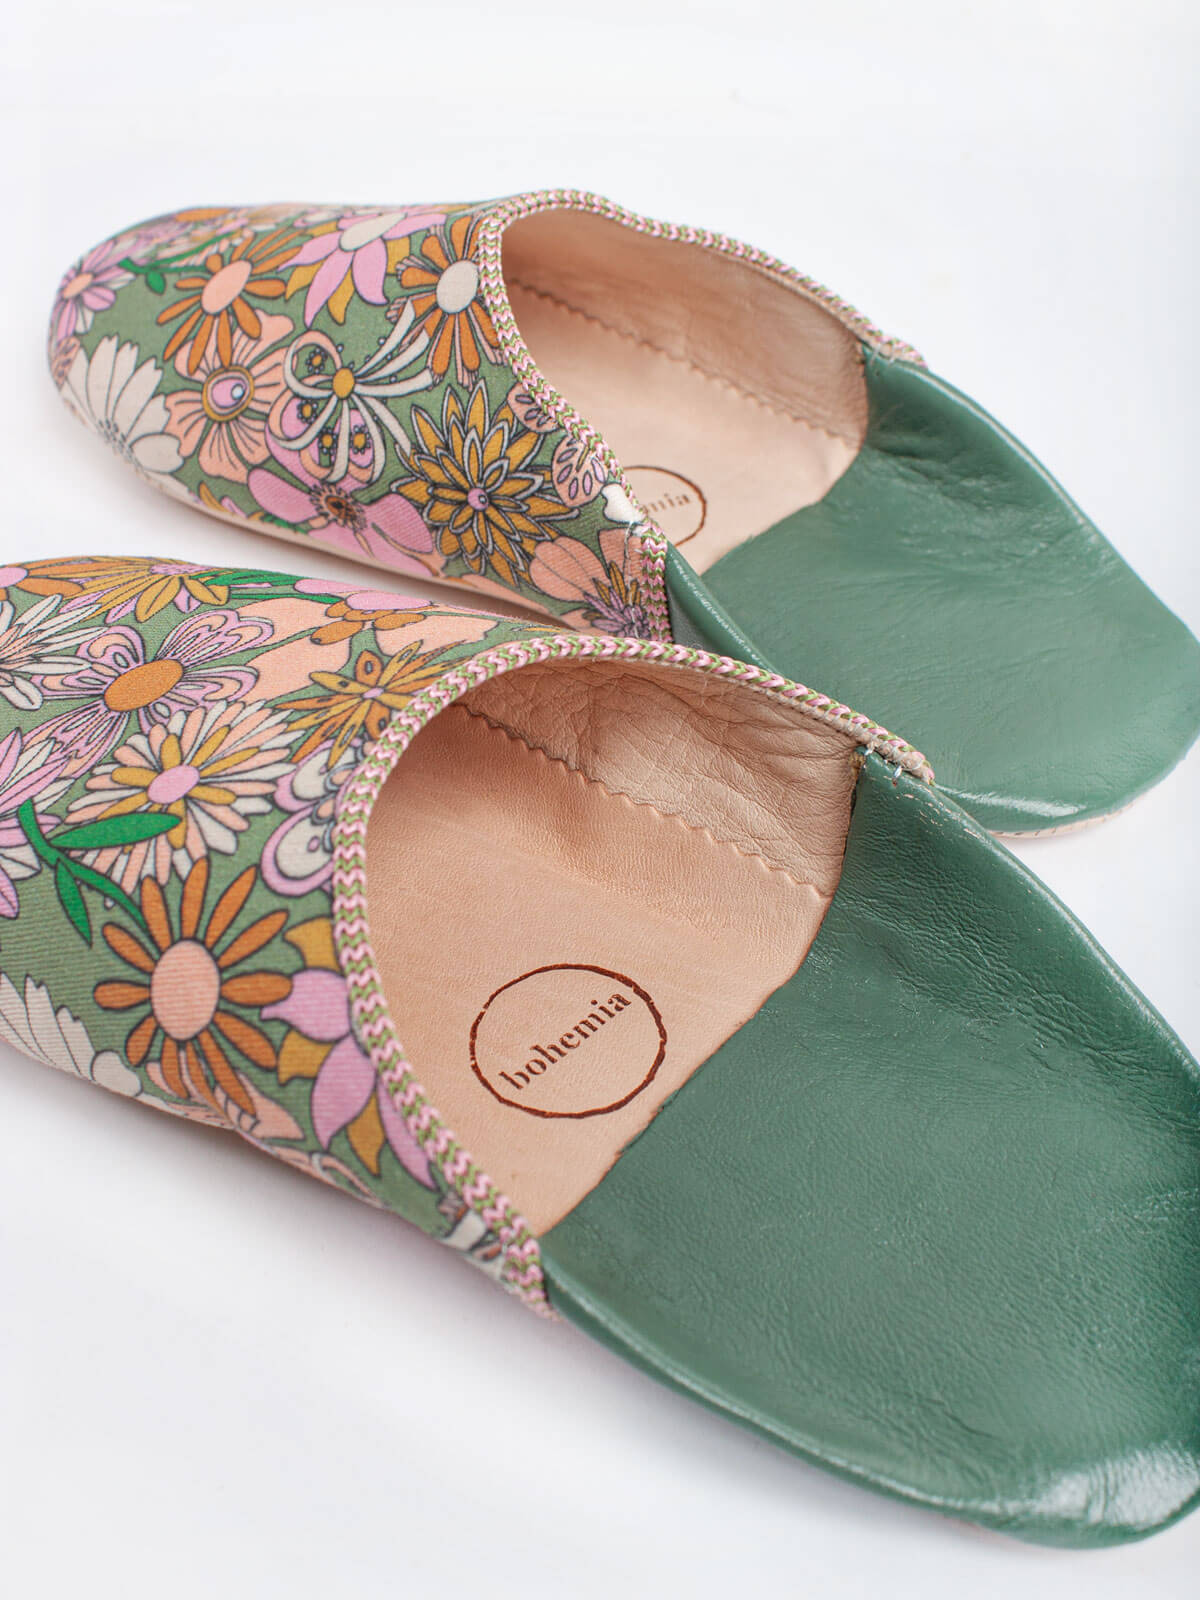 Margot Floral Babouche Slippers, Olive